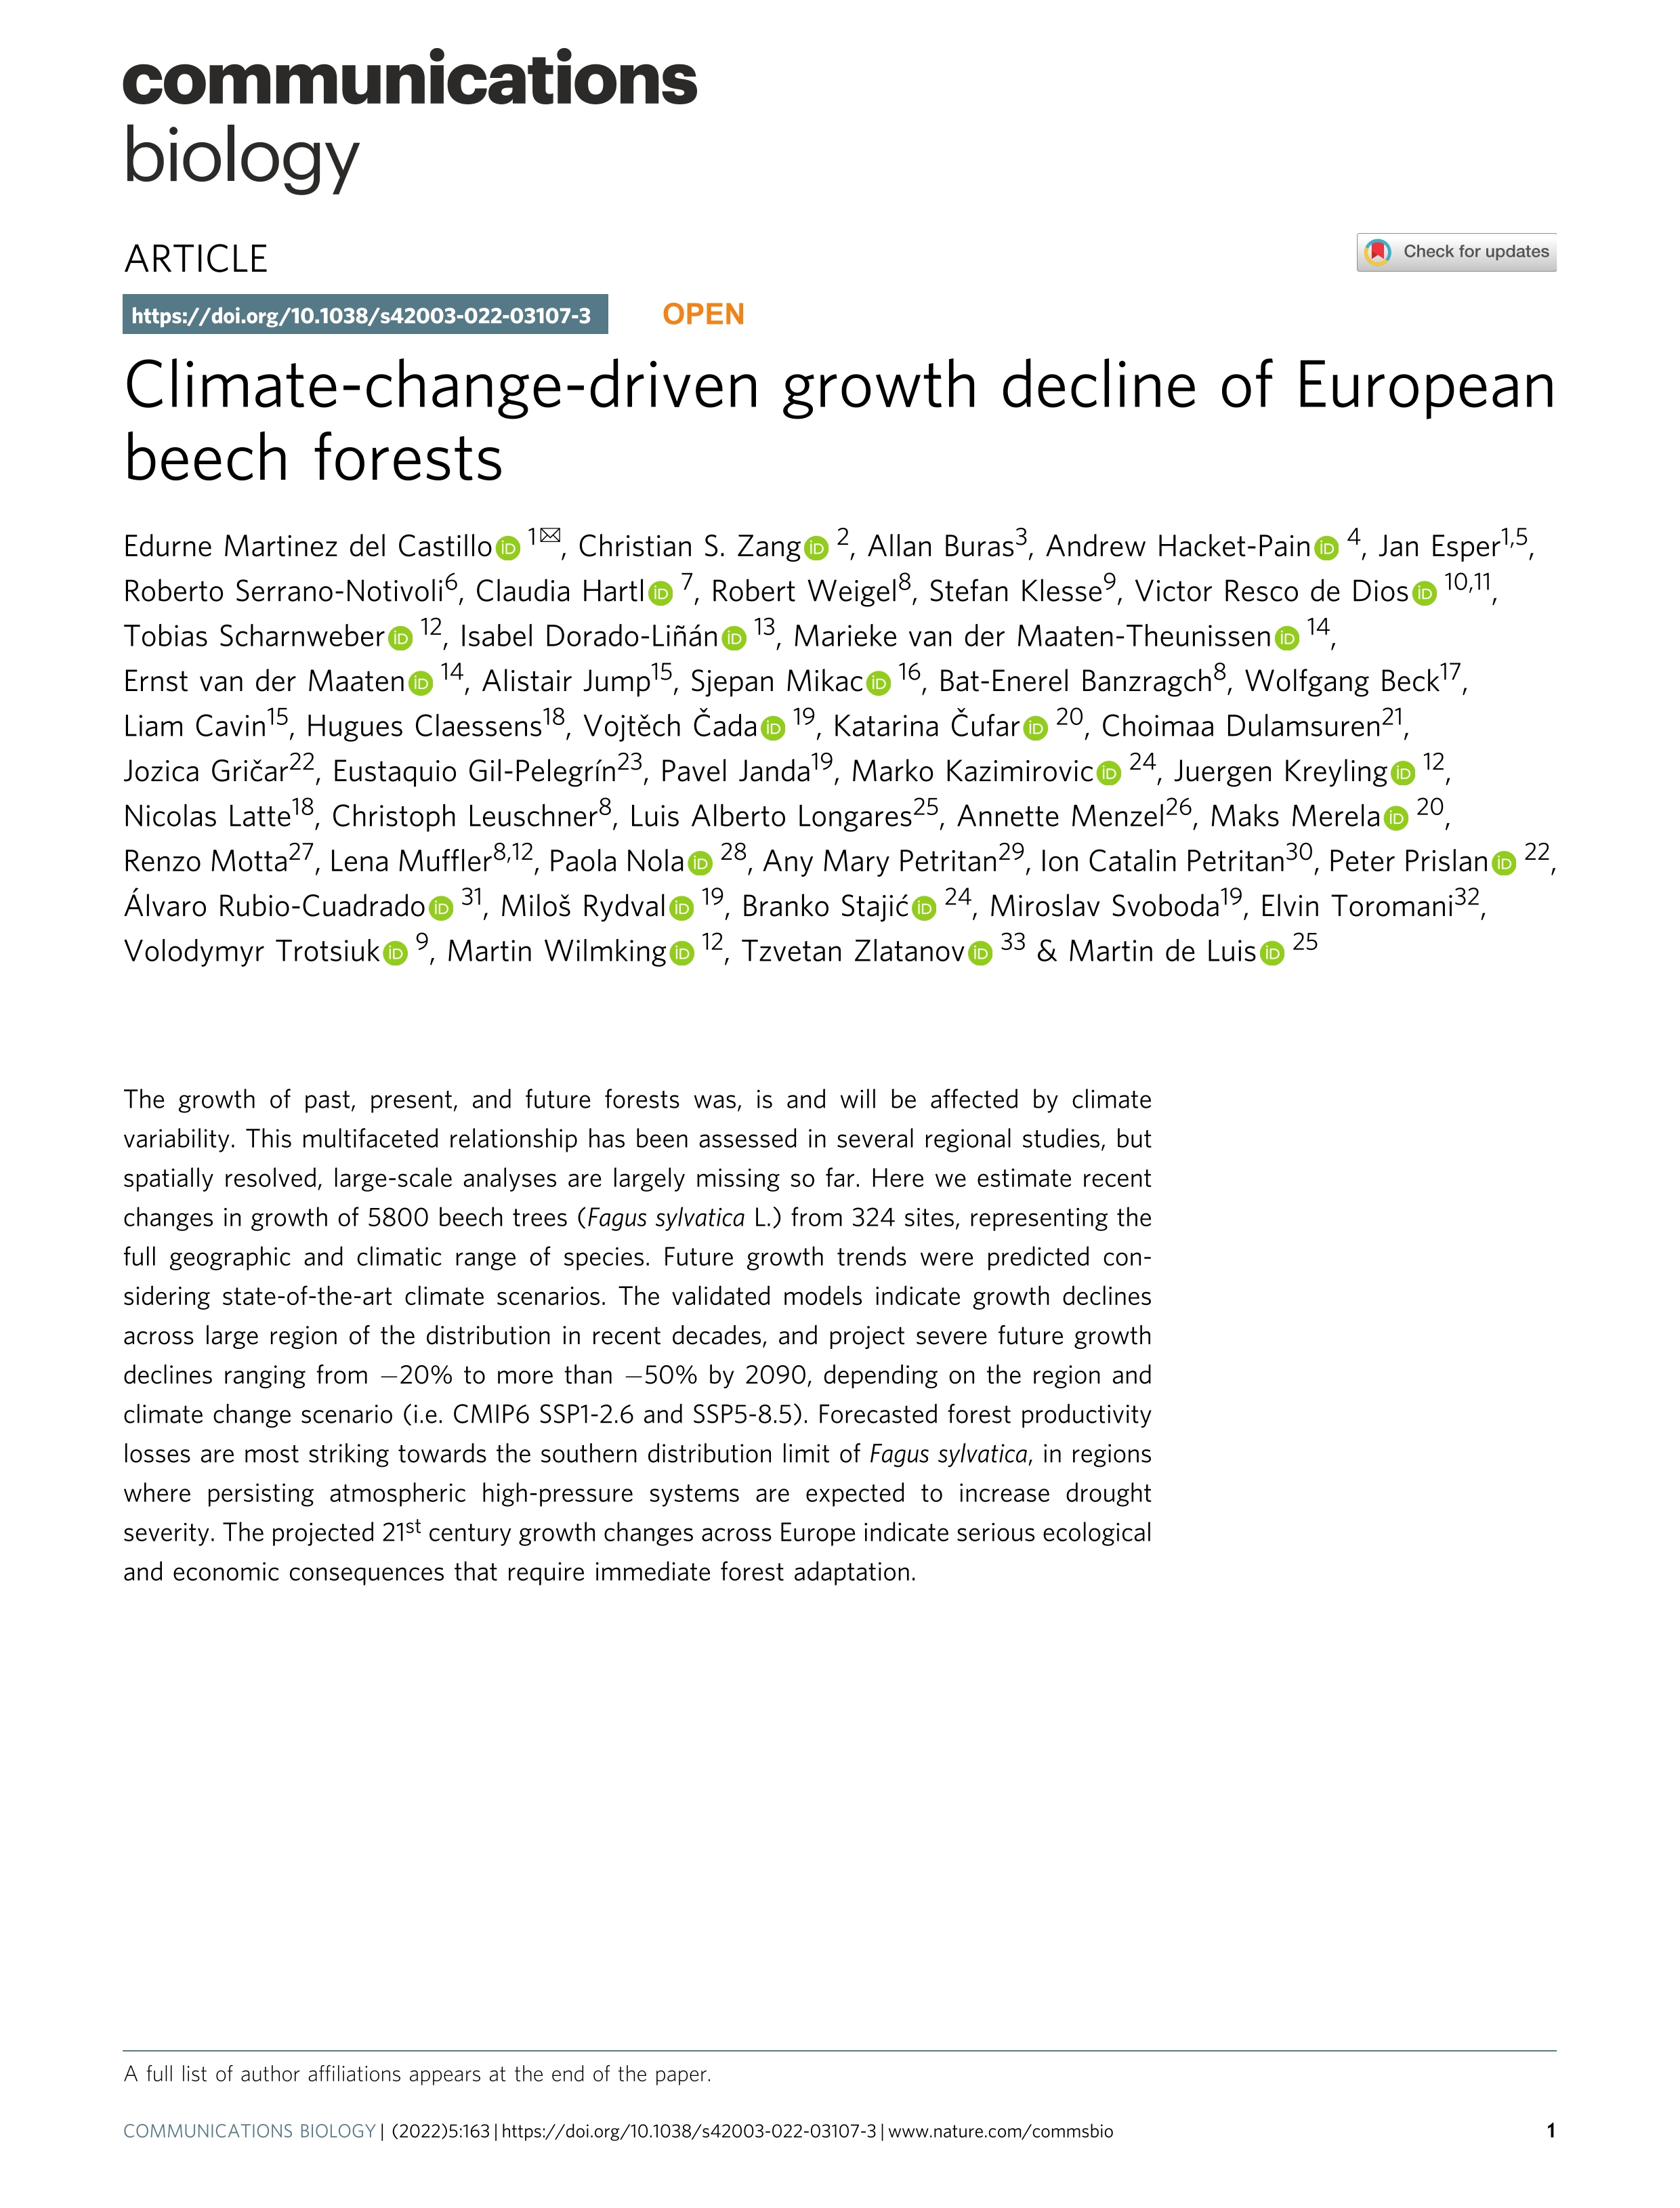 Climate-change-driven growth decline of European beech forests